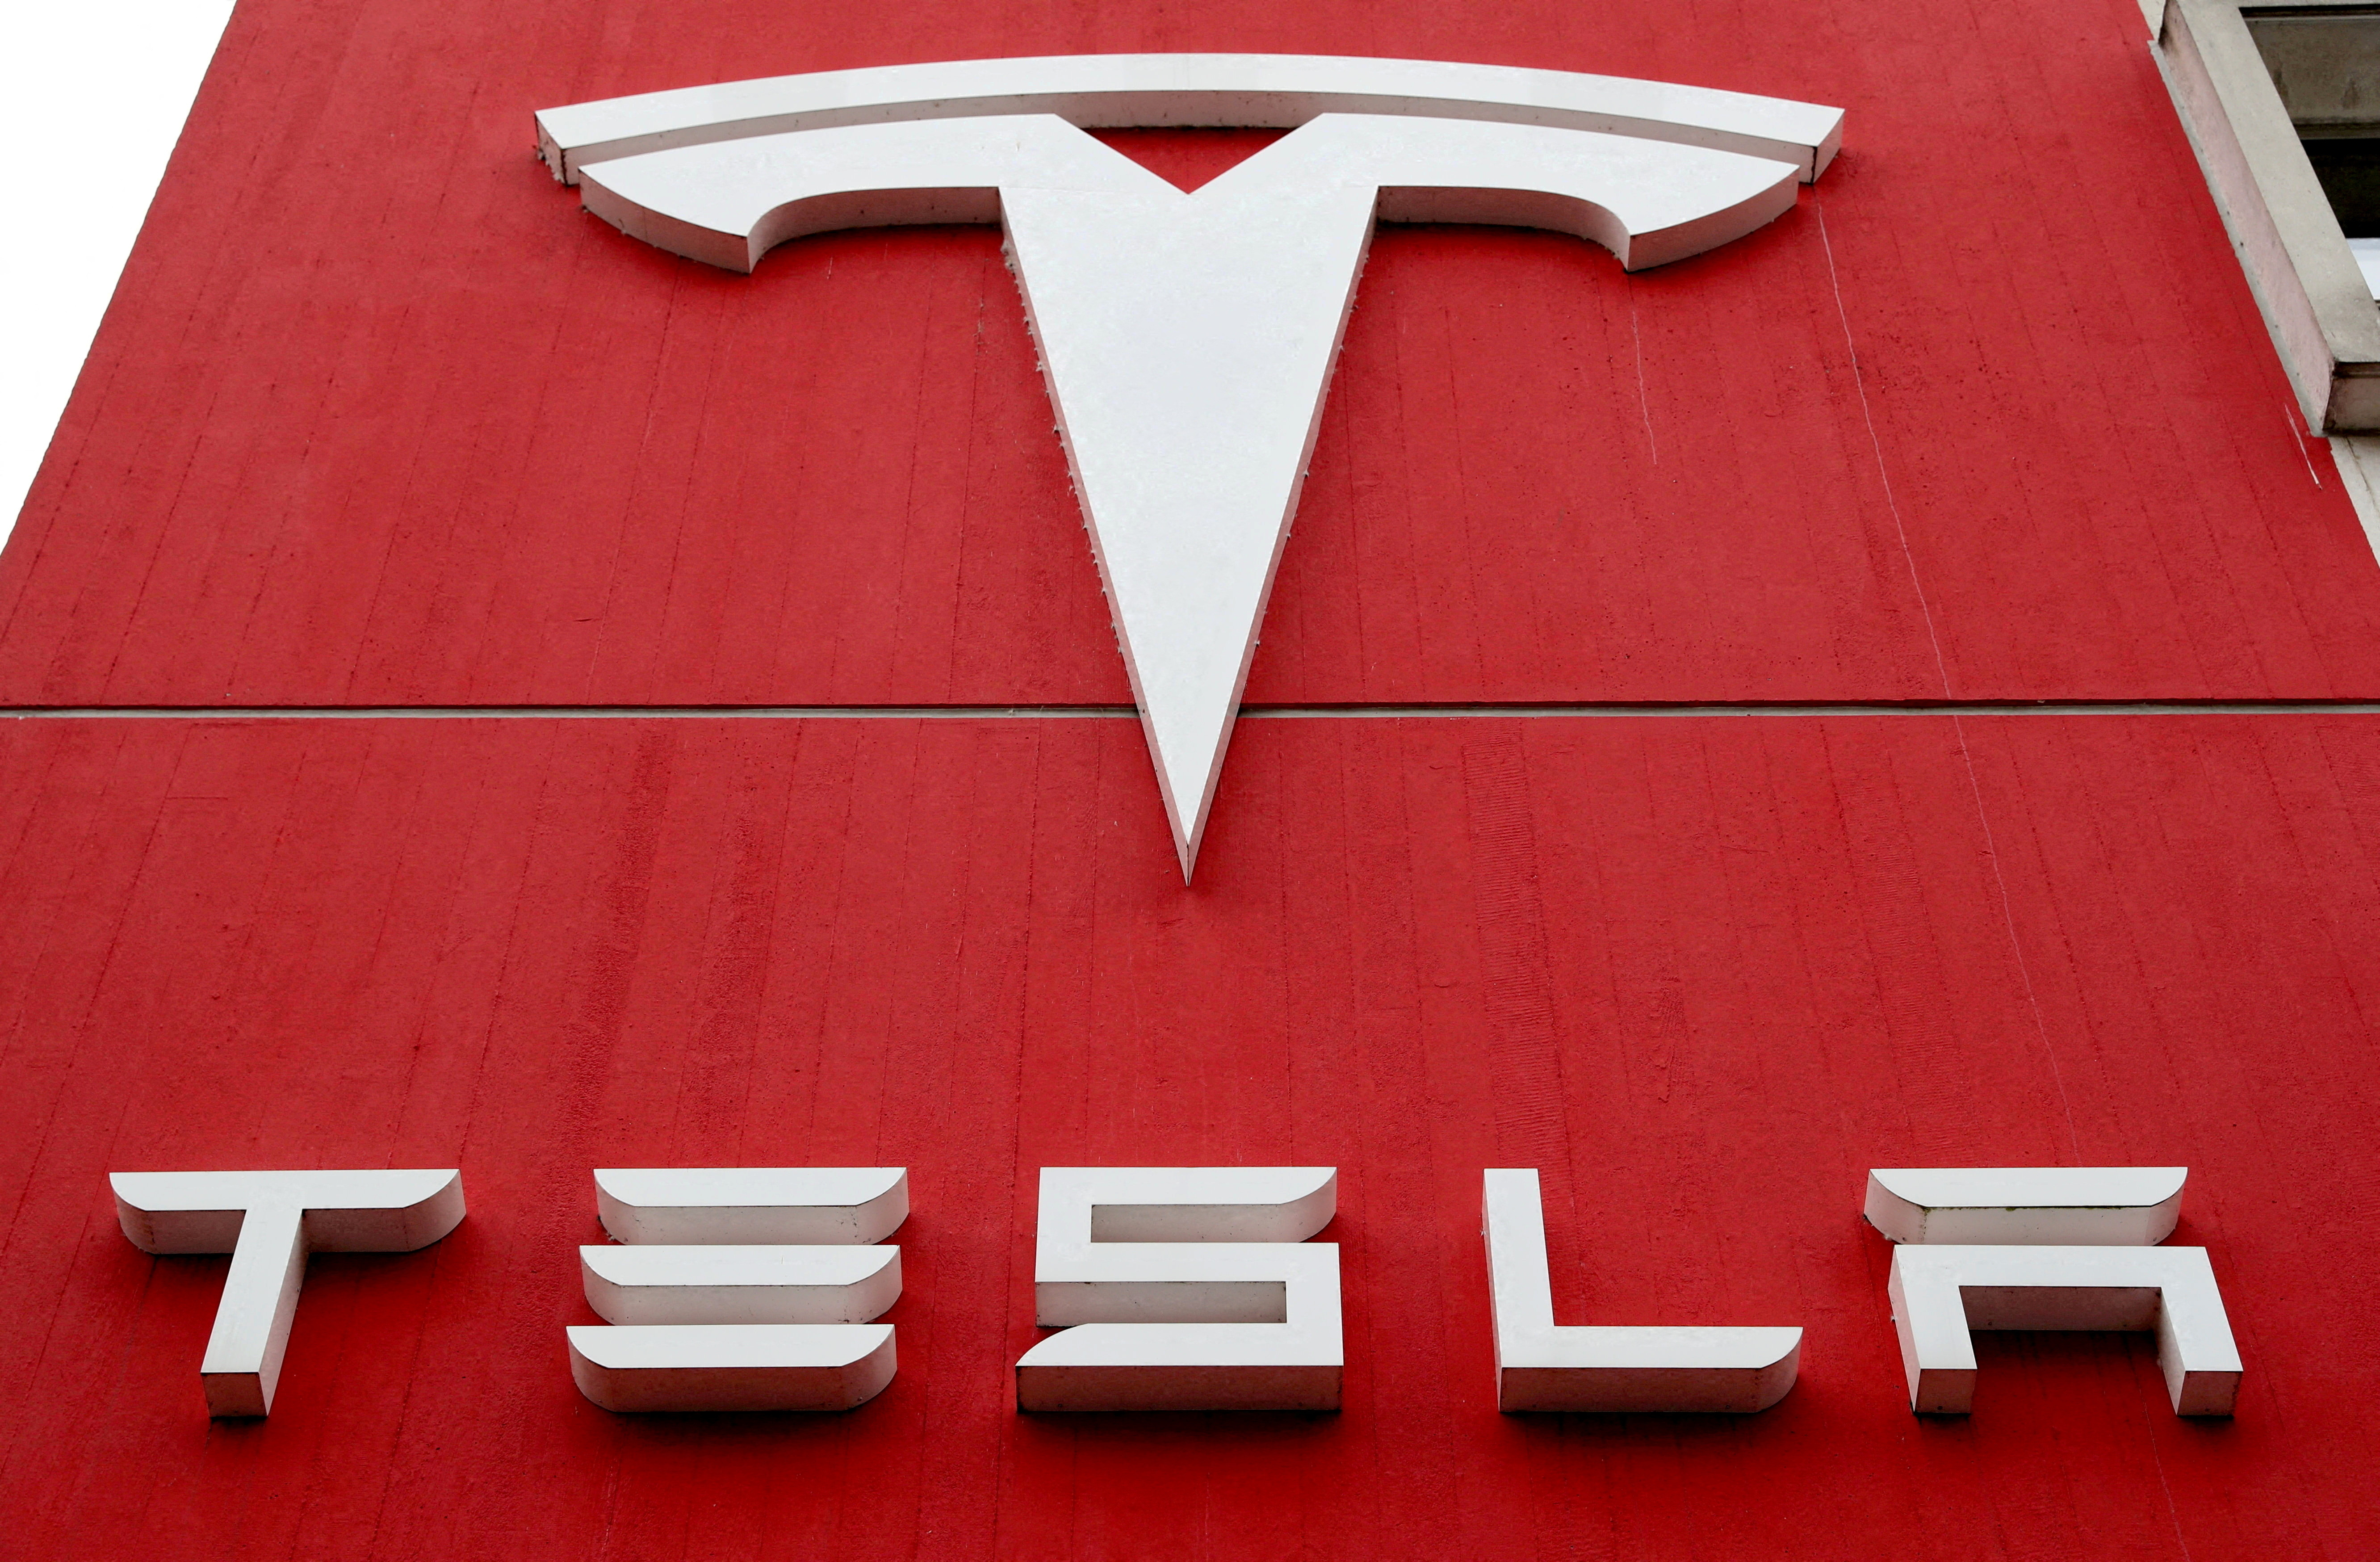 US will resolve Tesla Autopilot probe, may make announcement quickly, official says